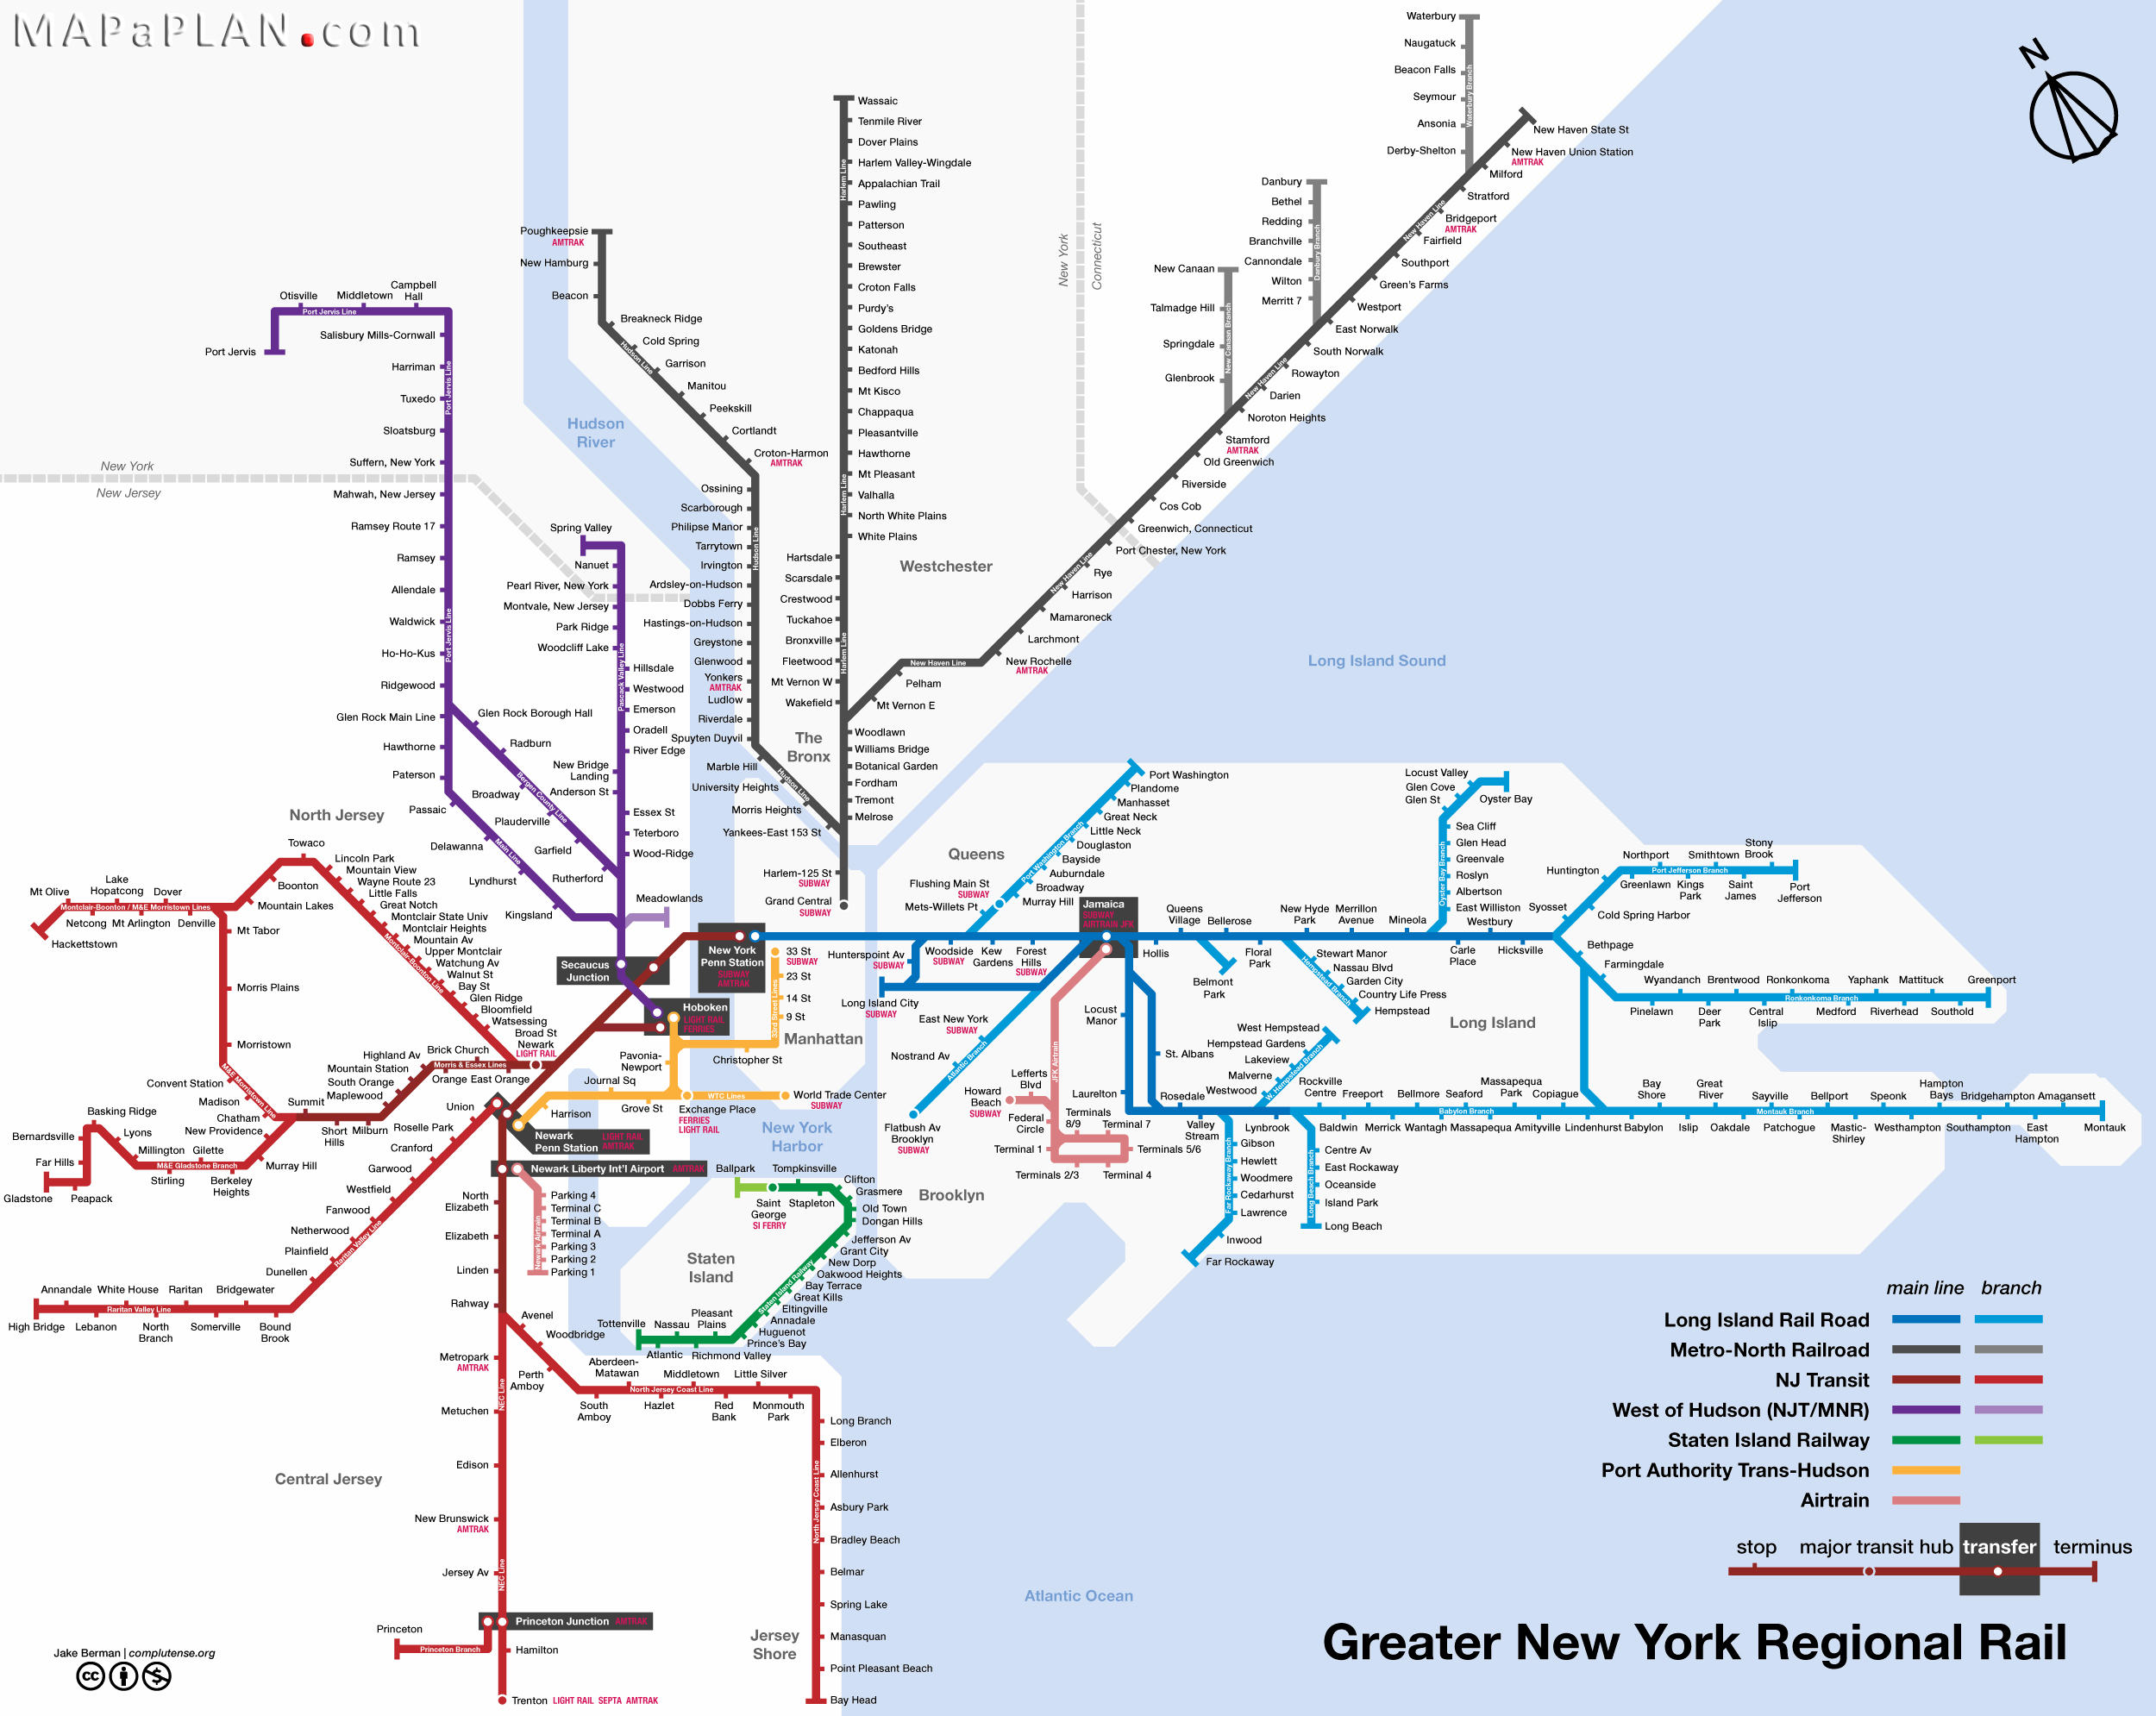 greater-new-york-regional-rail-railroad-train-lines-new-york-top-tourist-attractions-map